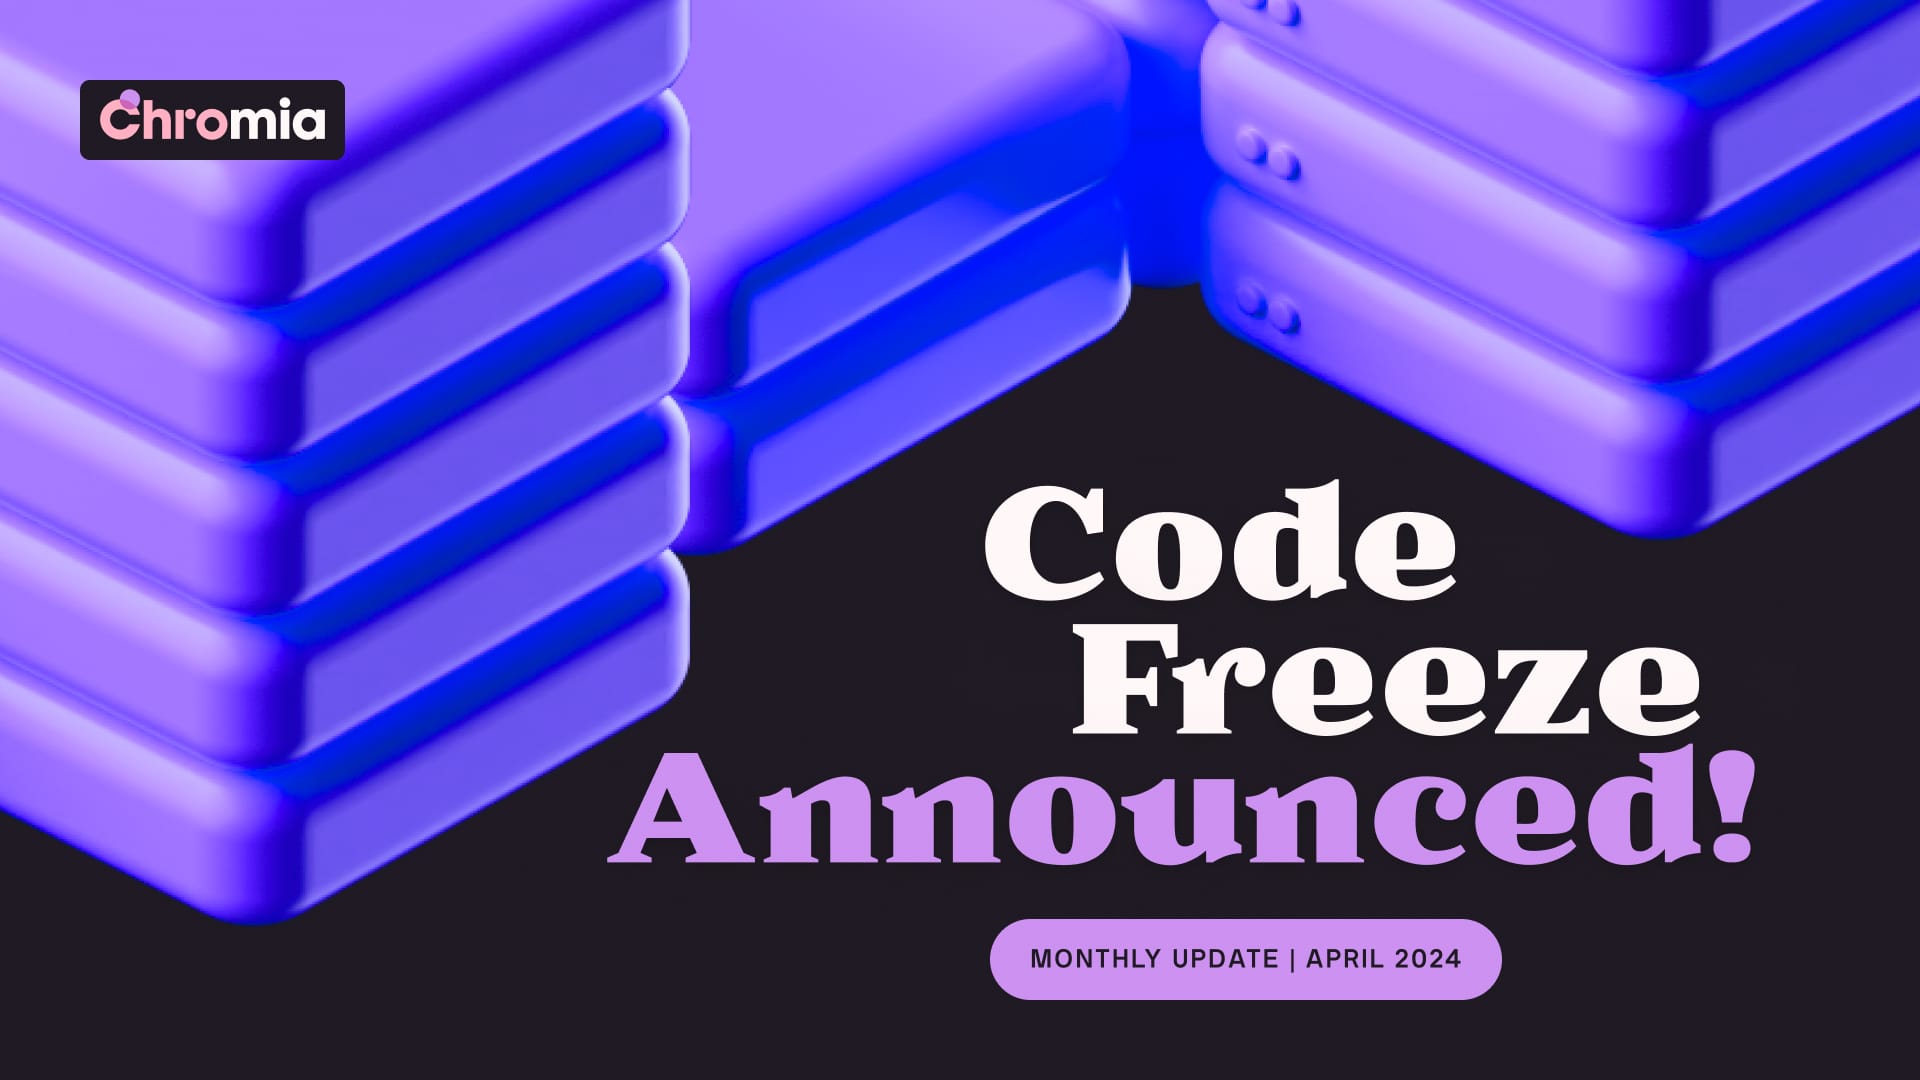 Chromia Monthly Update April 2024: Code Freeze is On!